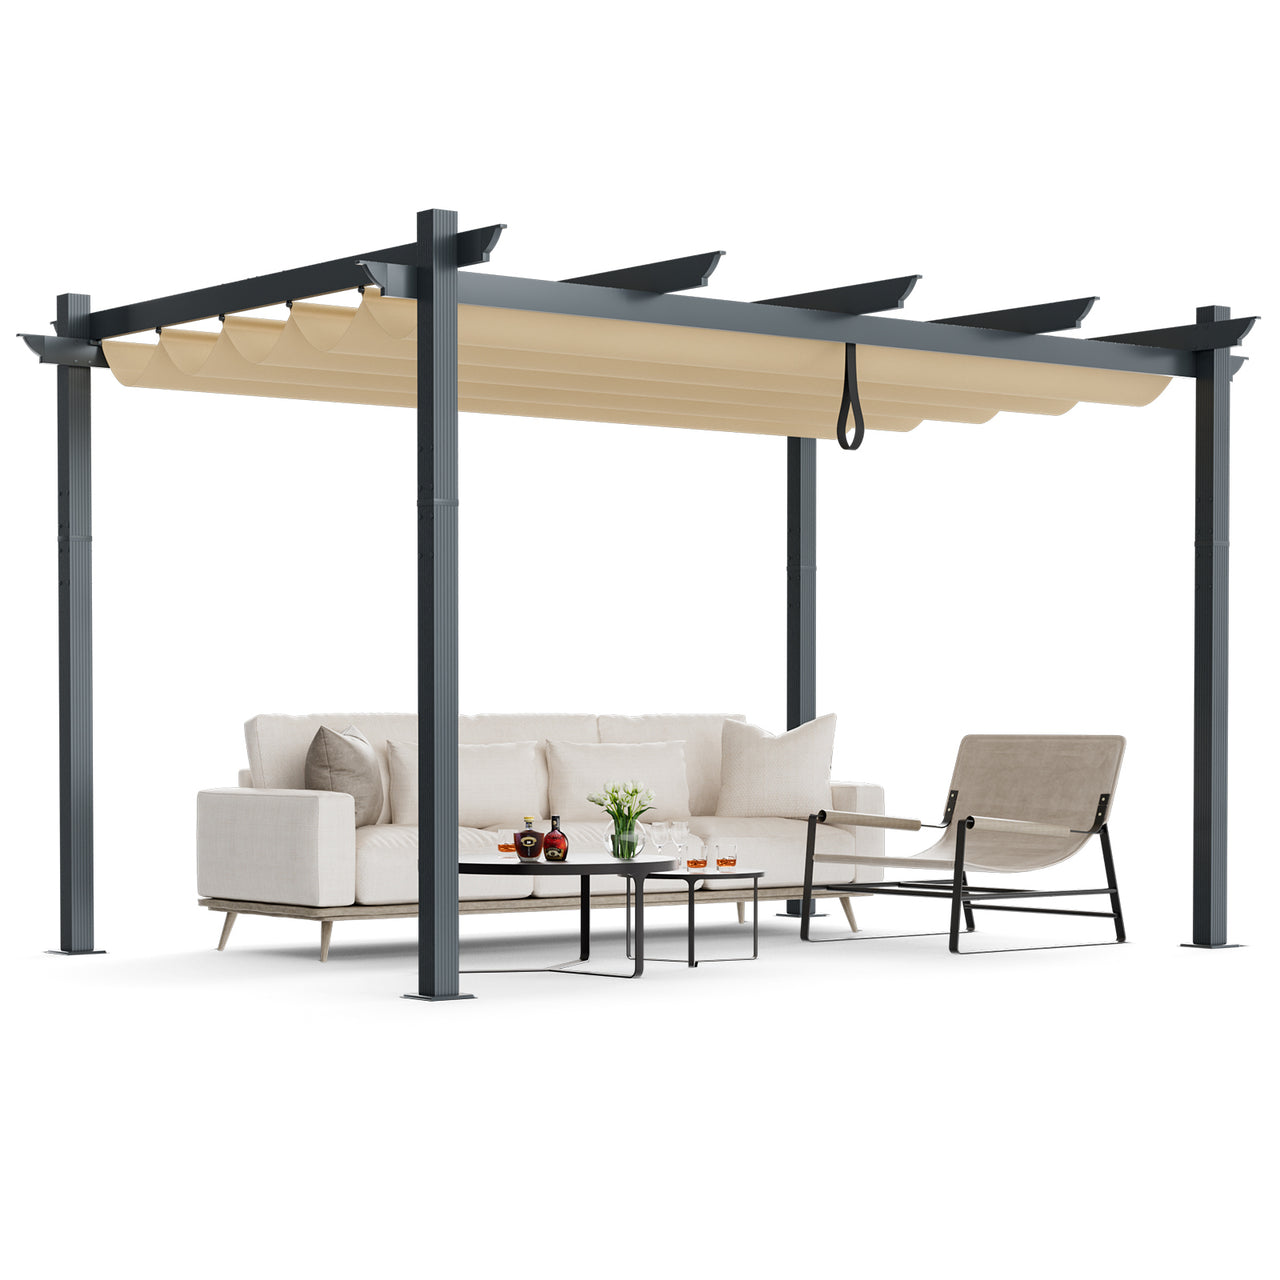 10 x 13 Feet Outdoor Aluminum Retractable Pergola Canopy Shelter - Gallery View 4 of 12